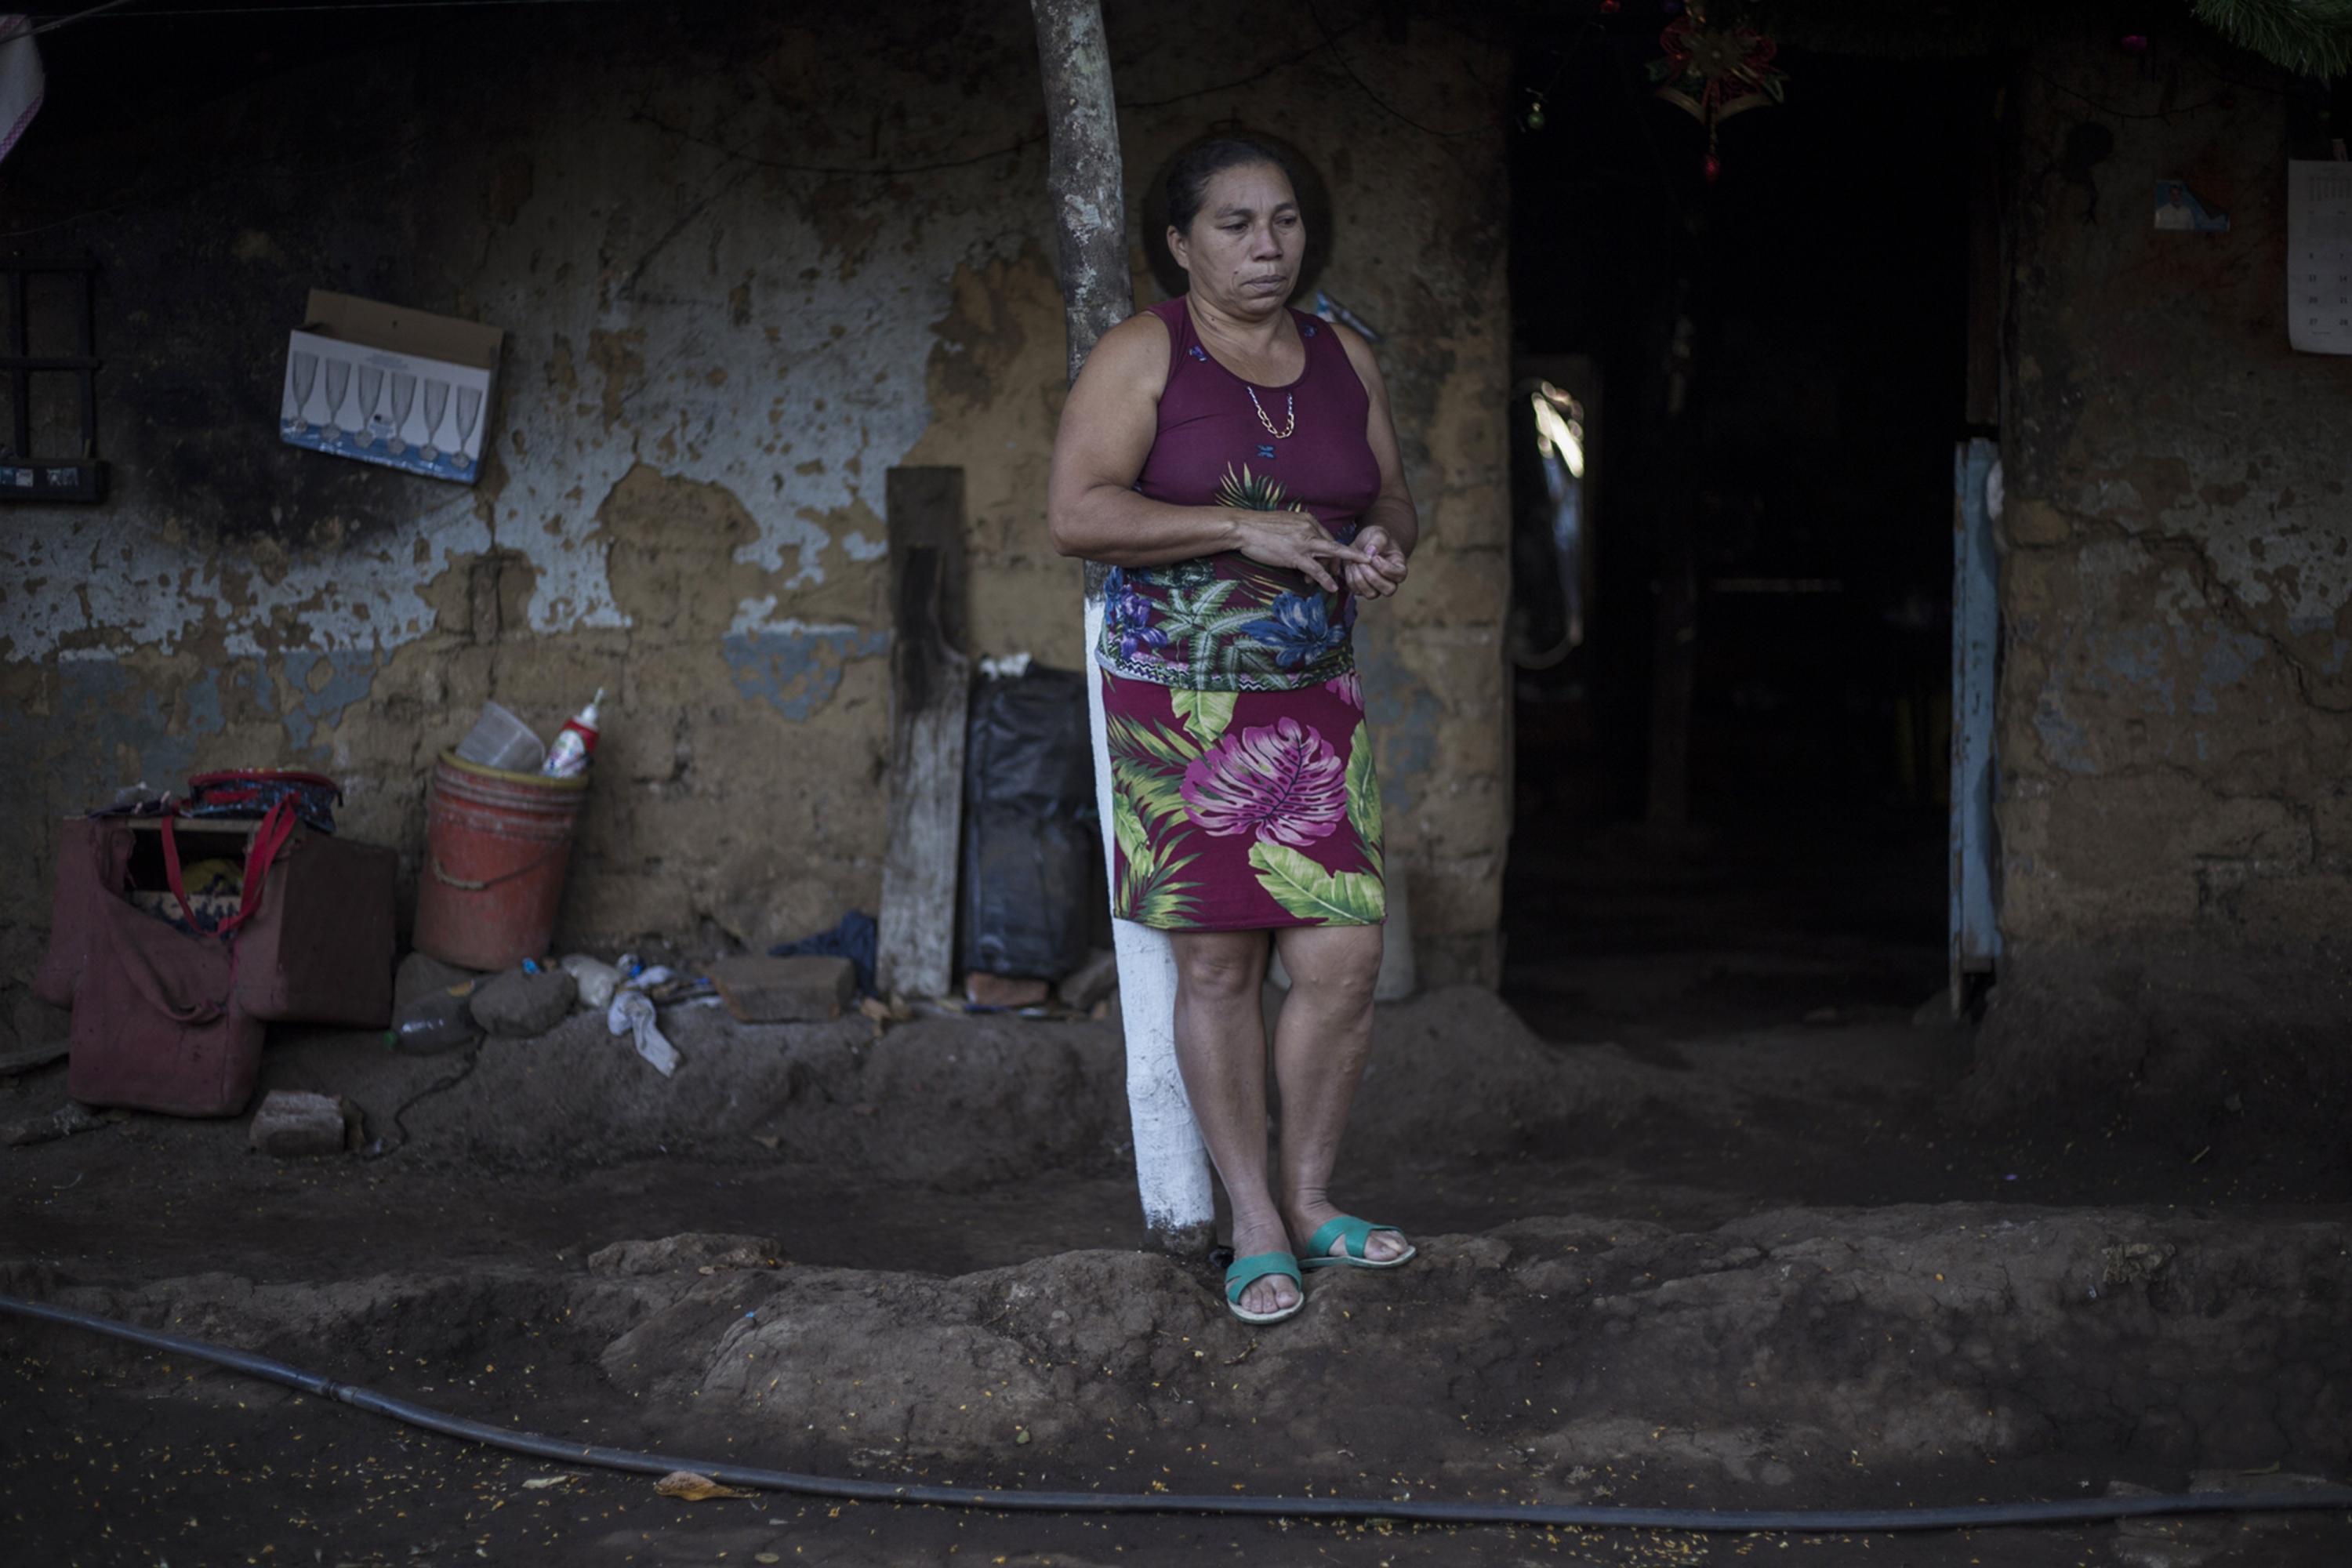 Ten years ago, Flor Cinco, now 50, drew her home’s water from the Chipilapa river through three kilometers of pipes that she independently constructed from her own investment. Whenever the water begins trickling slowly, she travels her pipeline in search of snags. “Often animals will bite the tubes, and I have to go find the damage in order to fix it. Here people are scared to defend themselves, seeing those who have been arrested,” she says. Flor is the sister of Rosa Cinco, one of the three people imprisoned as of February 2022 for protesting against Fénix.